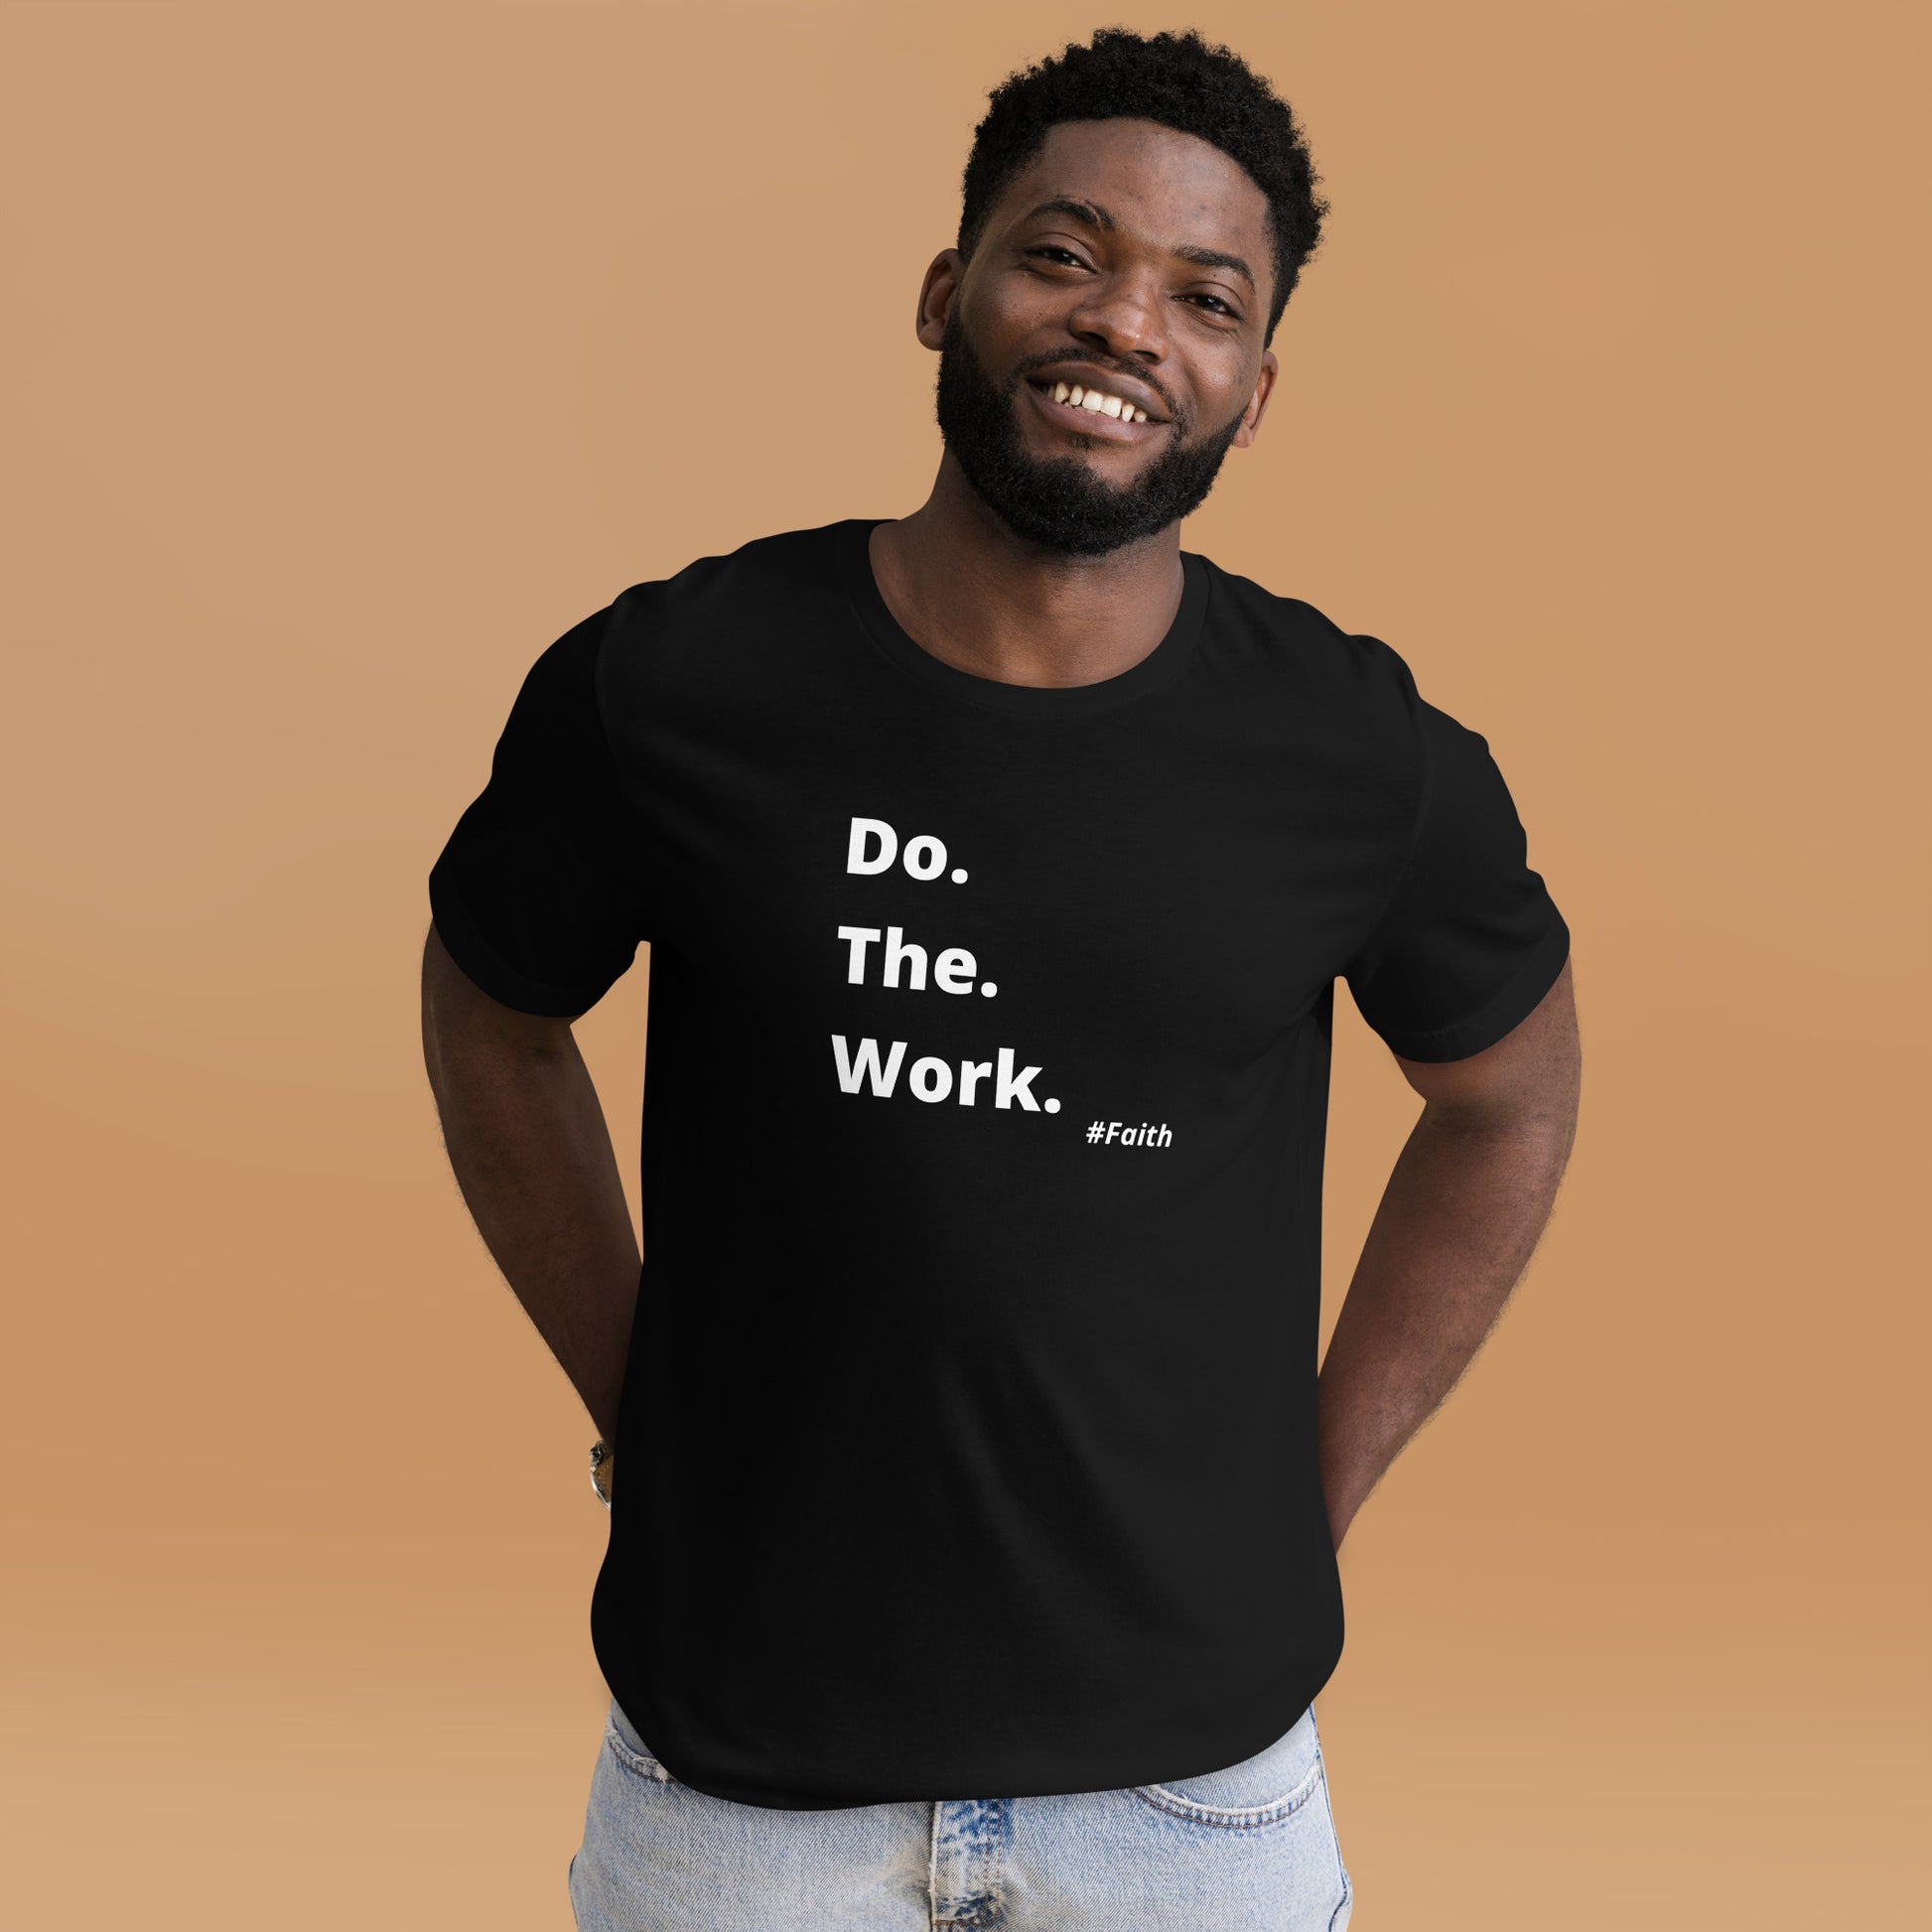 Do. The. Work. Short-Sleeve - Unisex Connection Black – F.A.I.T.H. T-Shirt